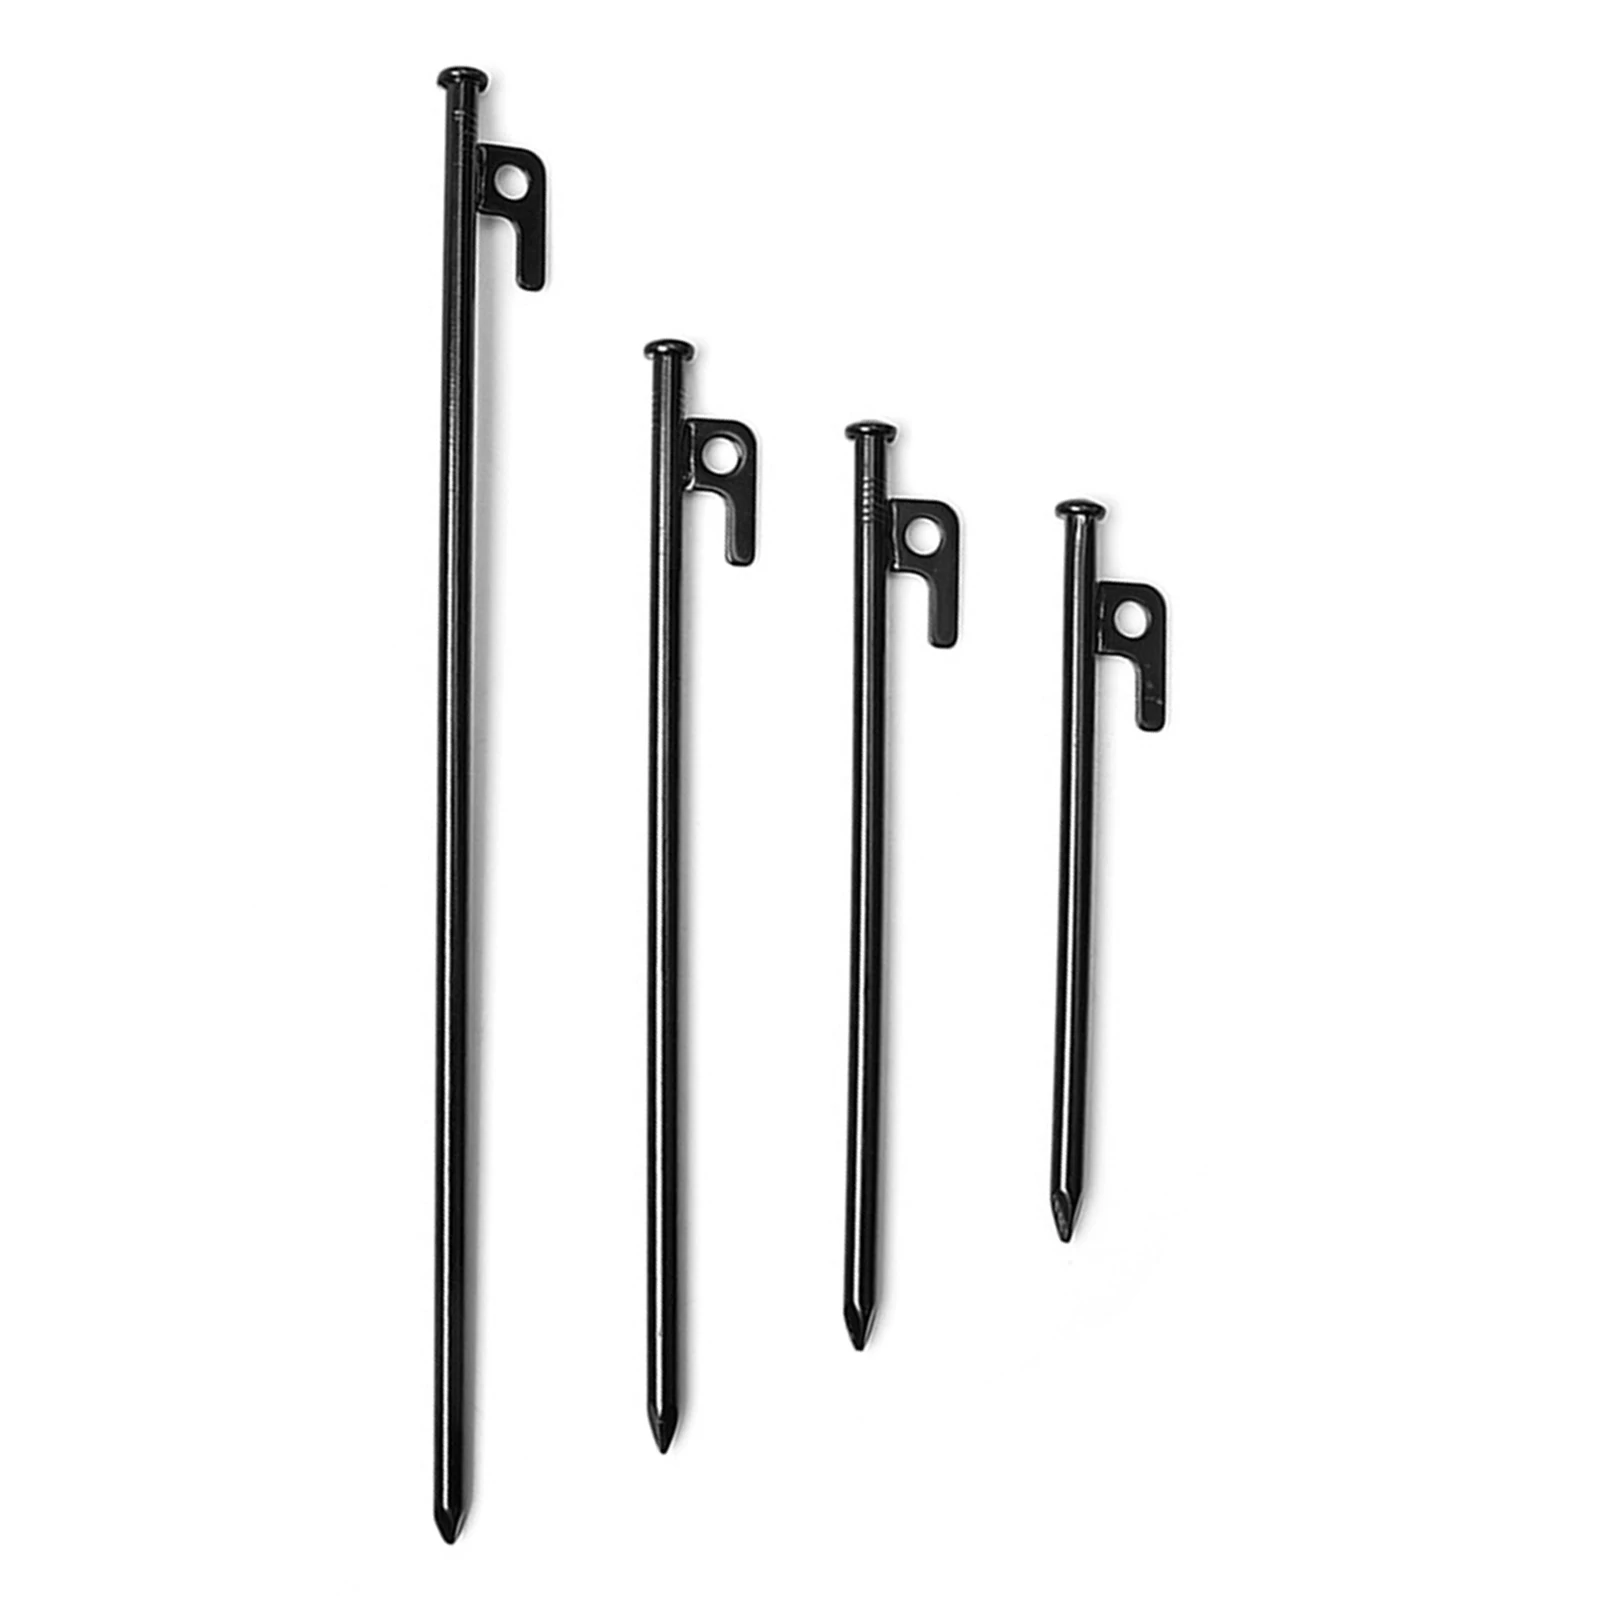 

4pcs/set Heavy Duty Tent Stakes, Awning Anchor Tarp Pegs, Canopy Ground Nails, Outdoor Garden Camping Hiking Trip Accessories